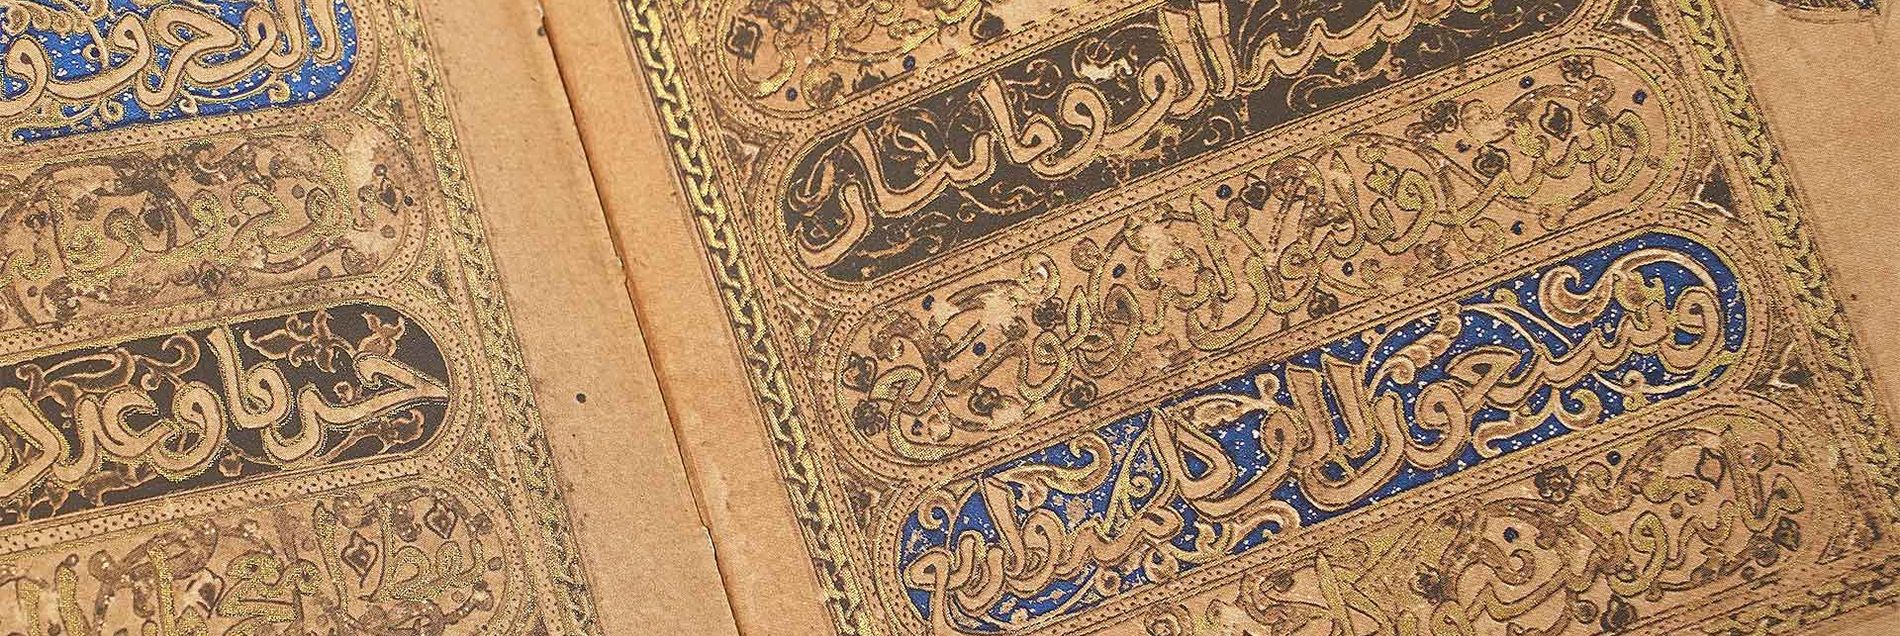 <i>“One of the most beautiful and magnificent manuscripts of the Quran by the famous universal artist”</i>